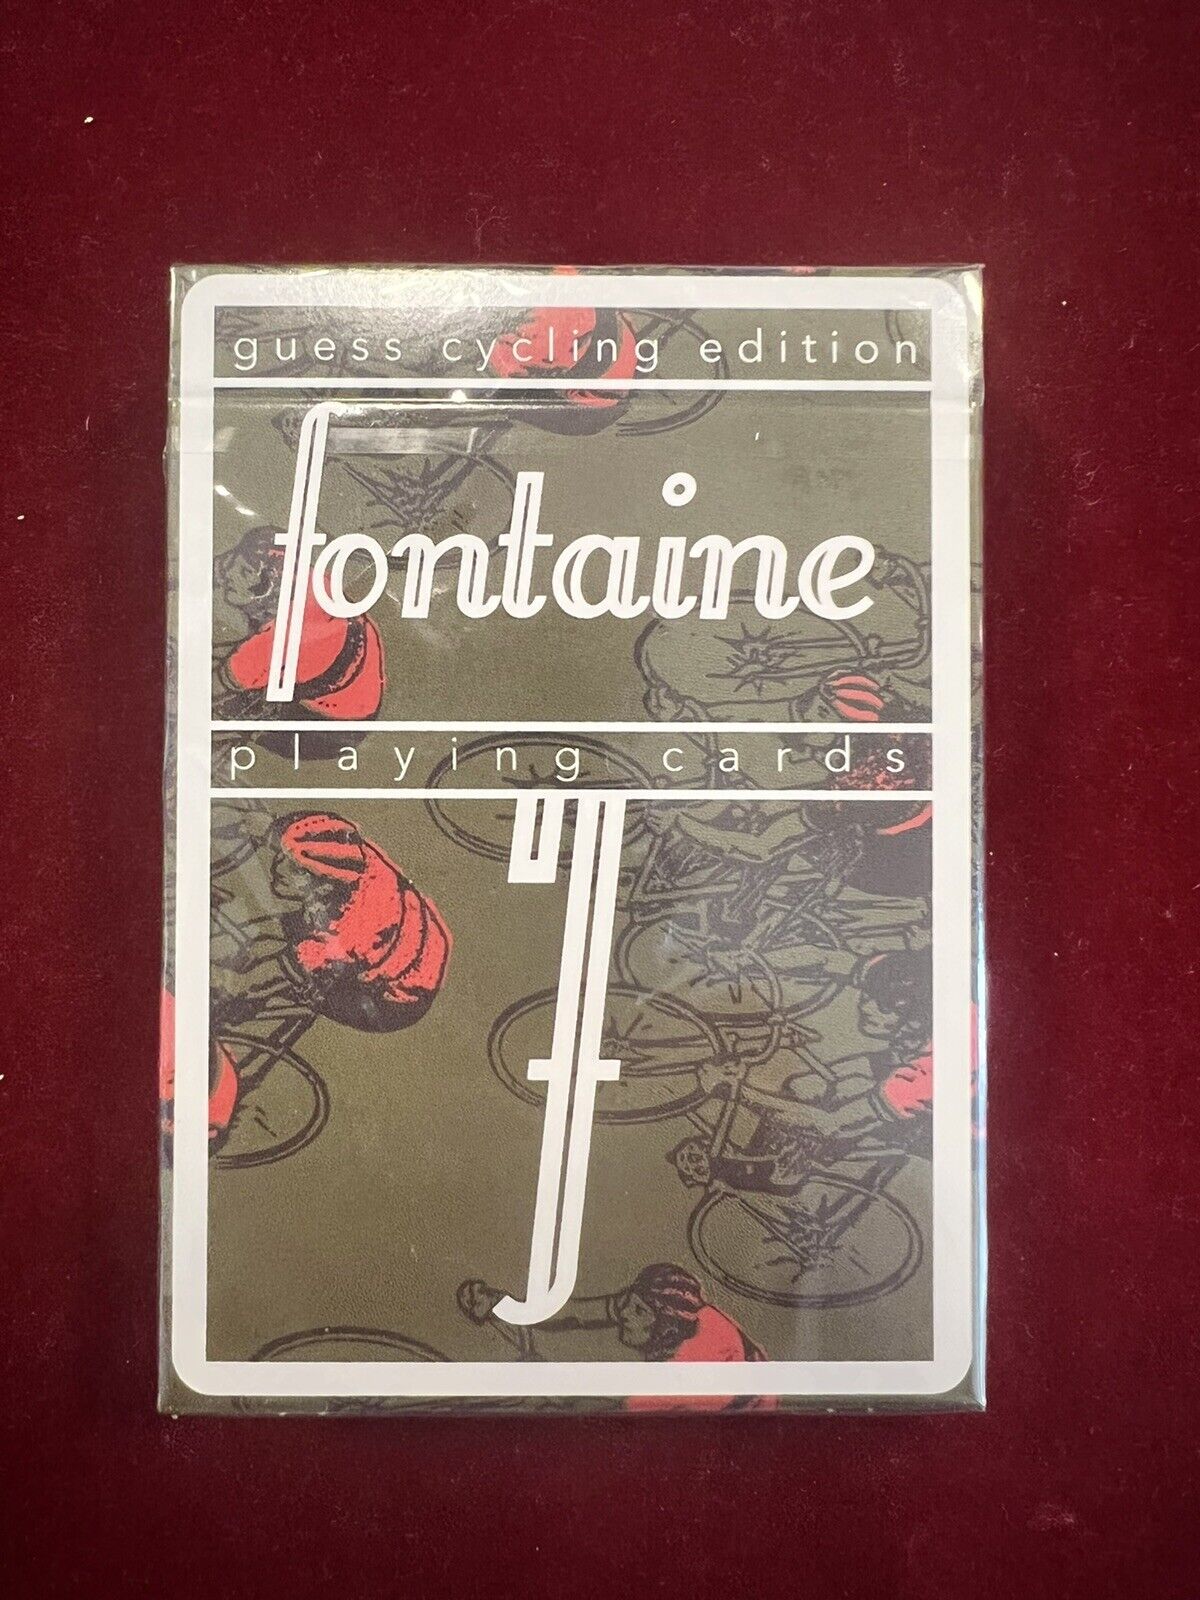 Fontaine Guess Cycling Edition Playing Cards.